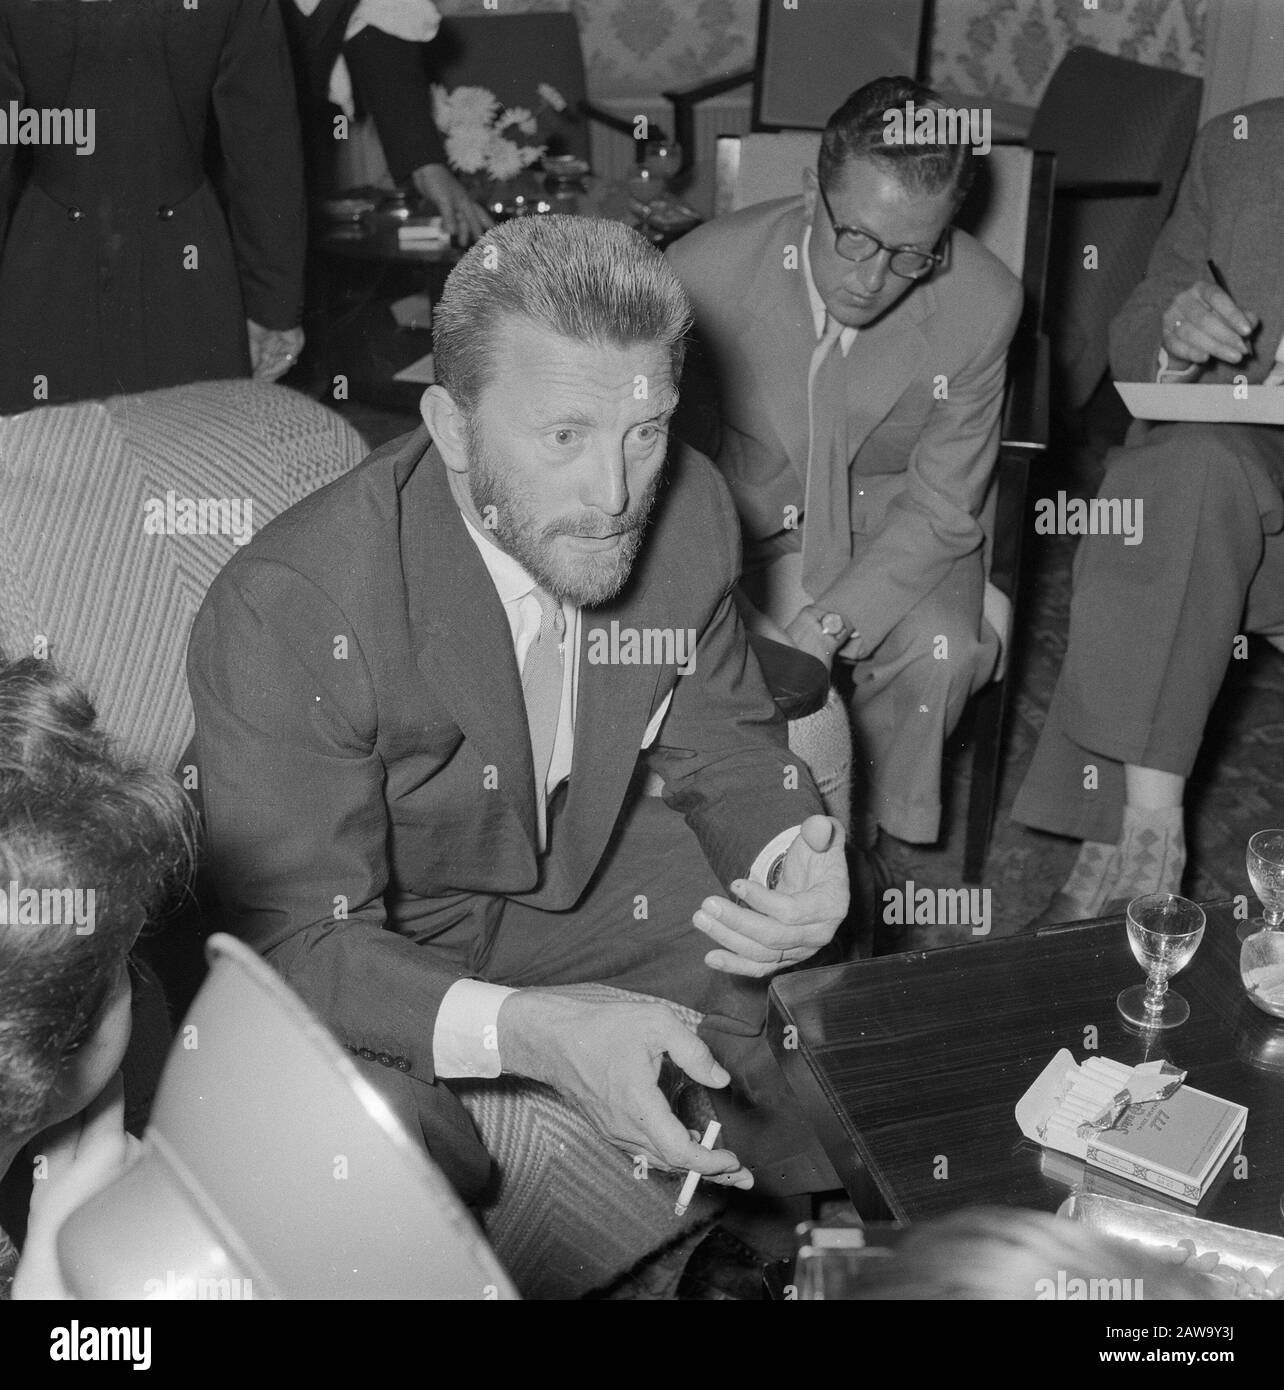 Kirk Douglas in Amstel Hotel [he is in the Netherlands for shooting the film Lust for Life about Vincent van Gogh, ed.] Date: November 3, 1955 Location: Amsterdam , Noord-Holland Keywords: actors, movies, movie stars Person Name: Douglas Kirk Stock Photo